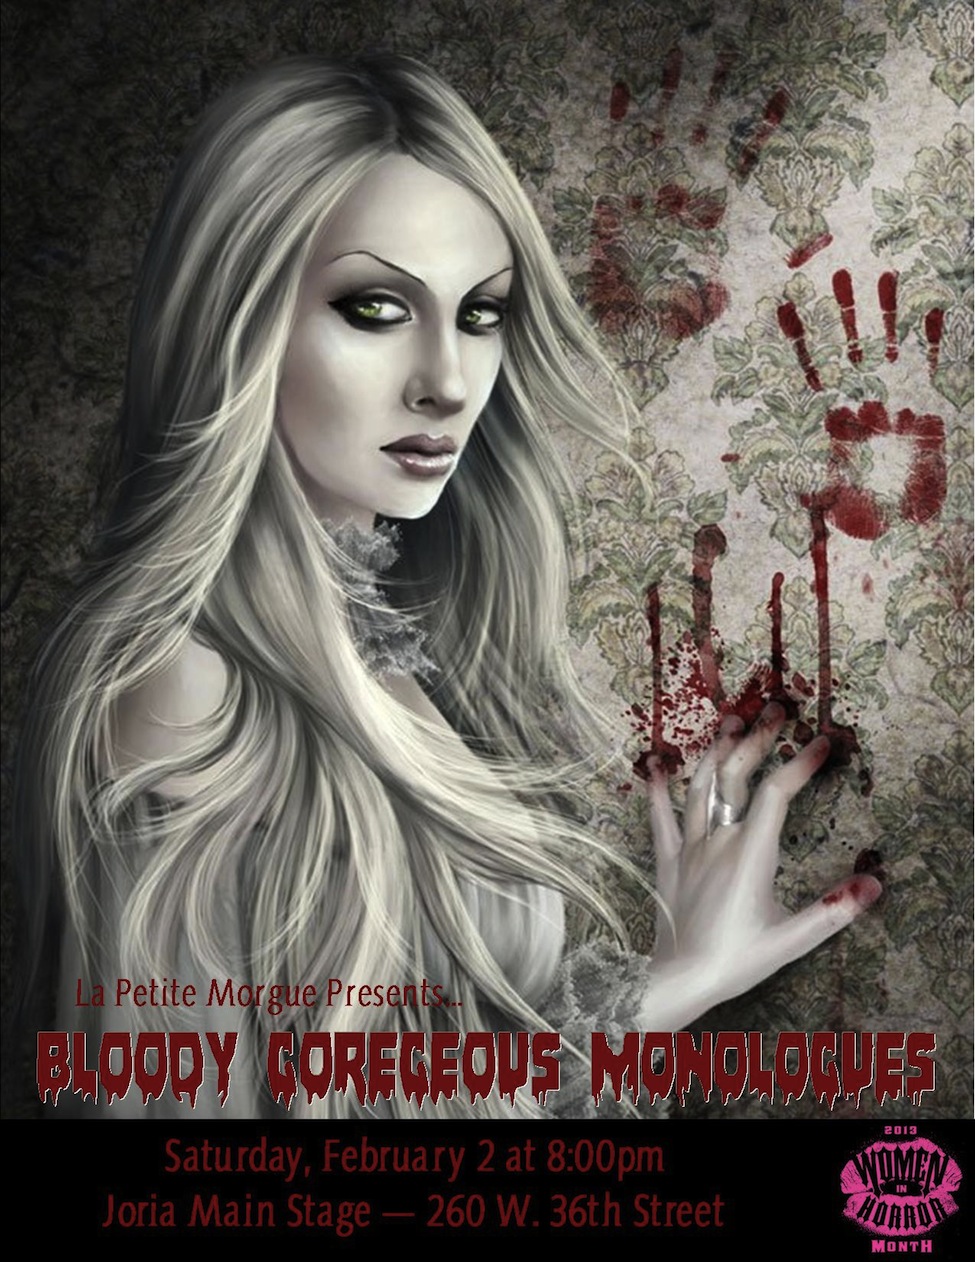 Postcard for BLOODY GORGEOUS MONOLOGUES from La Petite Morgue.